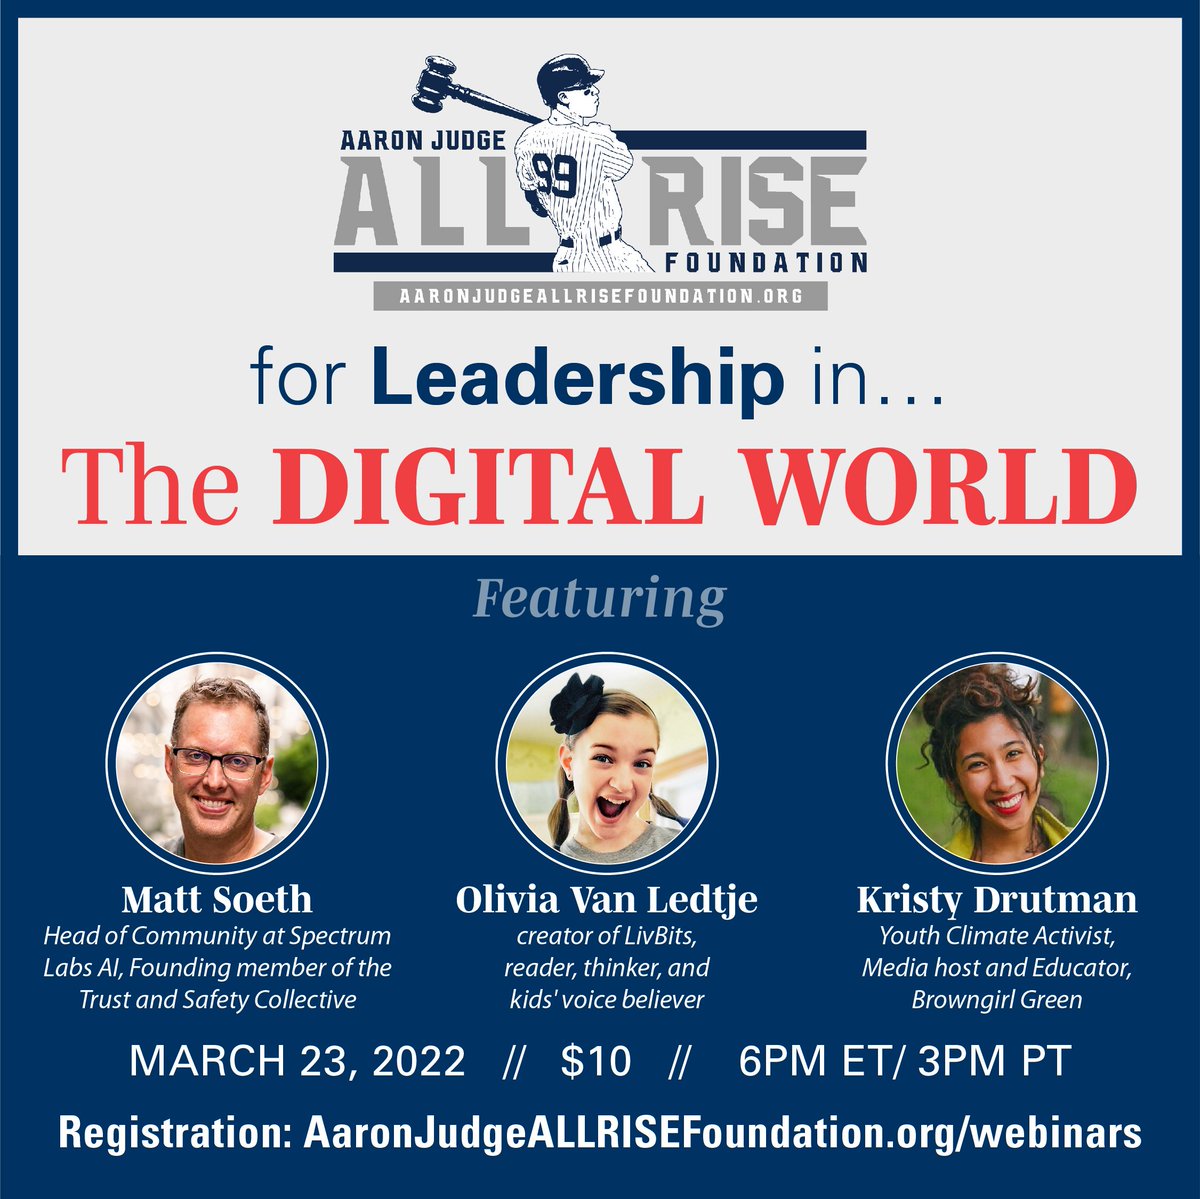 Join us for this exciting conversation about leading on #SocialMedia. @thelivbits and @browngirl_green will share how they took their passion to the digital world to create change! First 30 to register to today can use code FRIDAYFIVE to join for $5 Aaronjudgeallrisefoundation.org/webinars